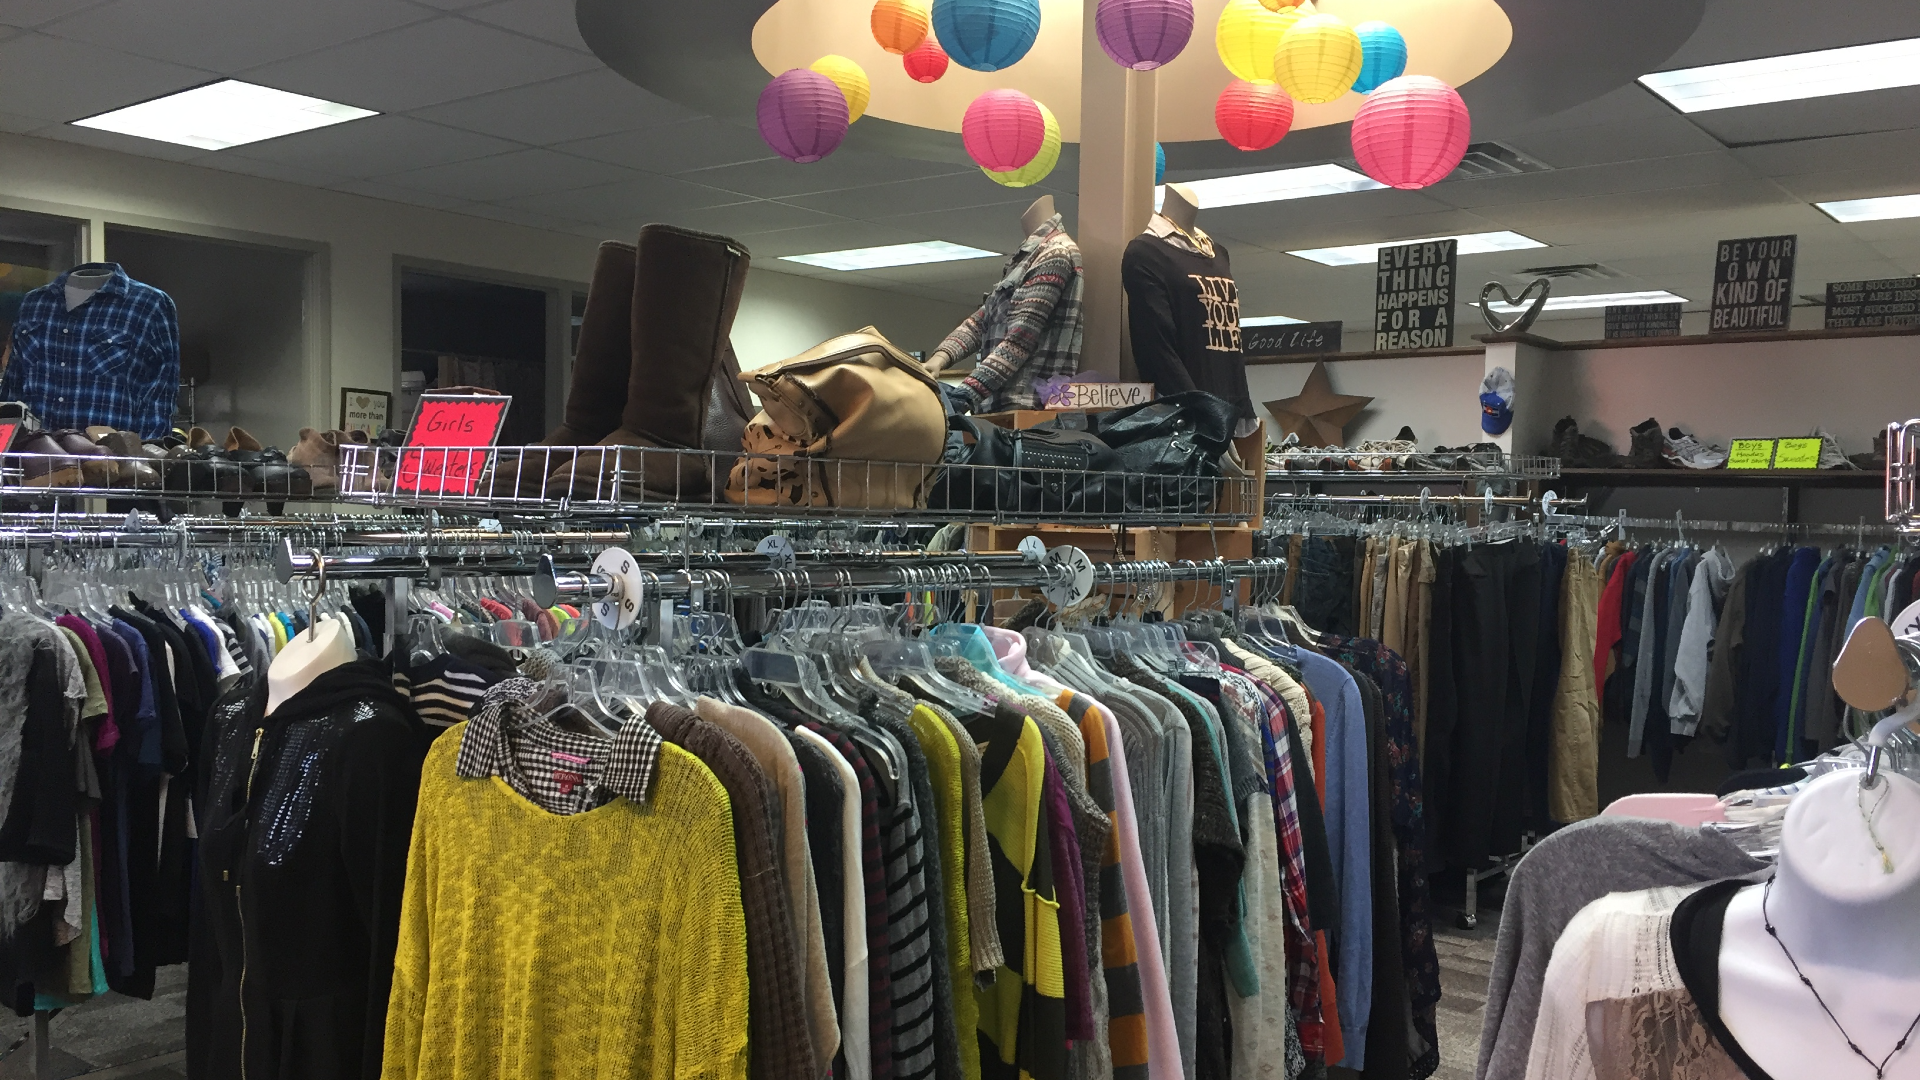 Clothing hanging on racks in a store